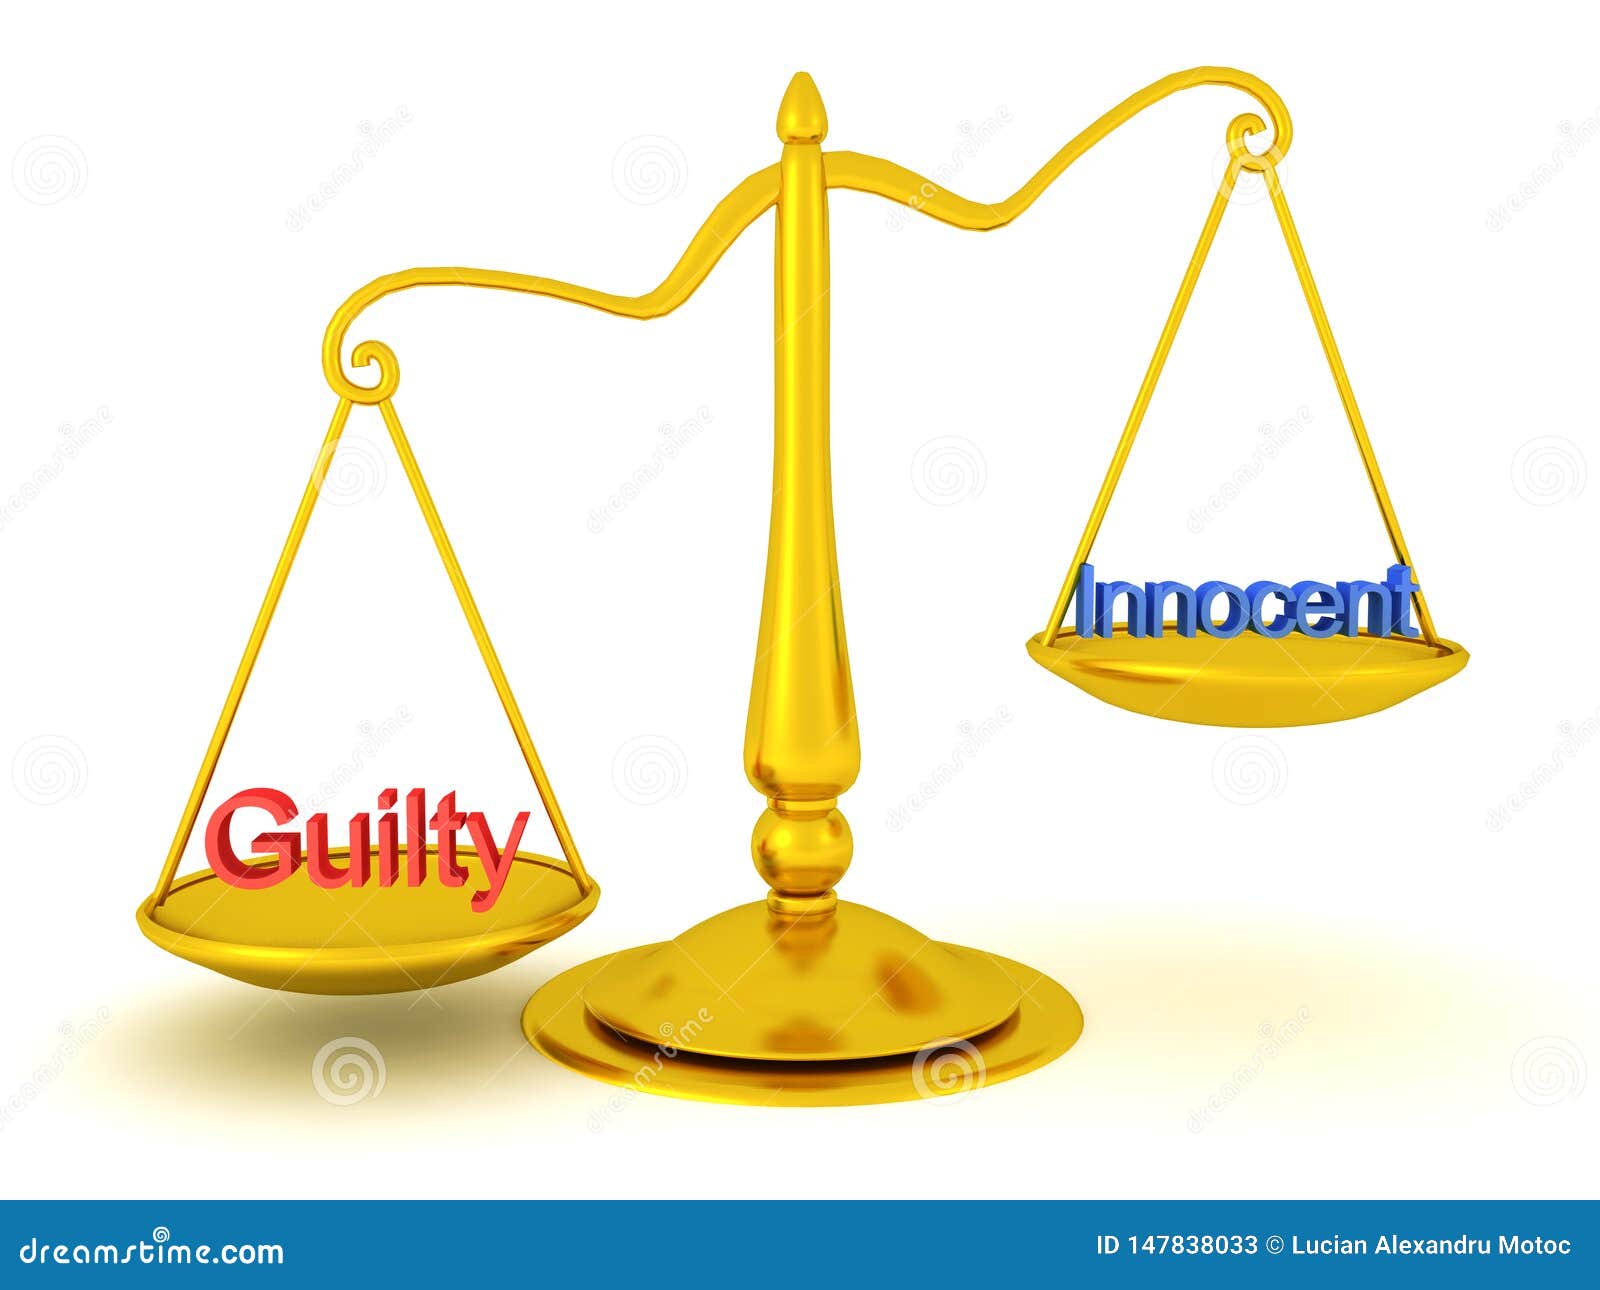 3d Rendering Of Guilty Vs Innocent Justice Concept Stock Illustration Illustration Of Miscellaneous Innocent